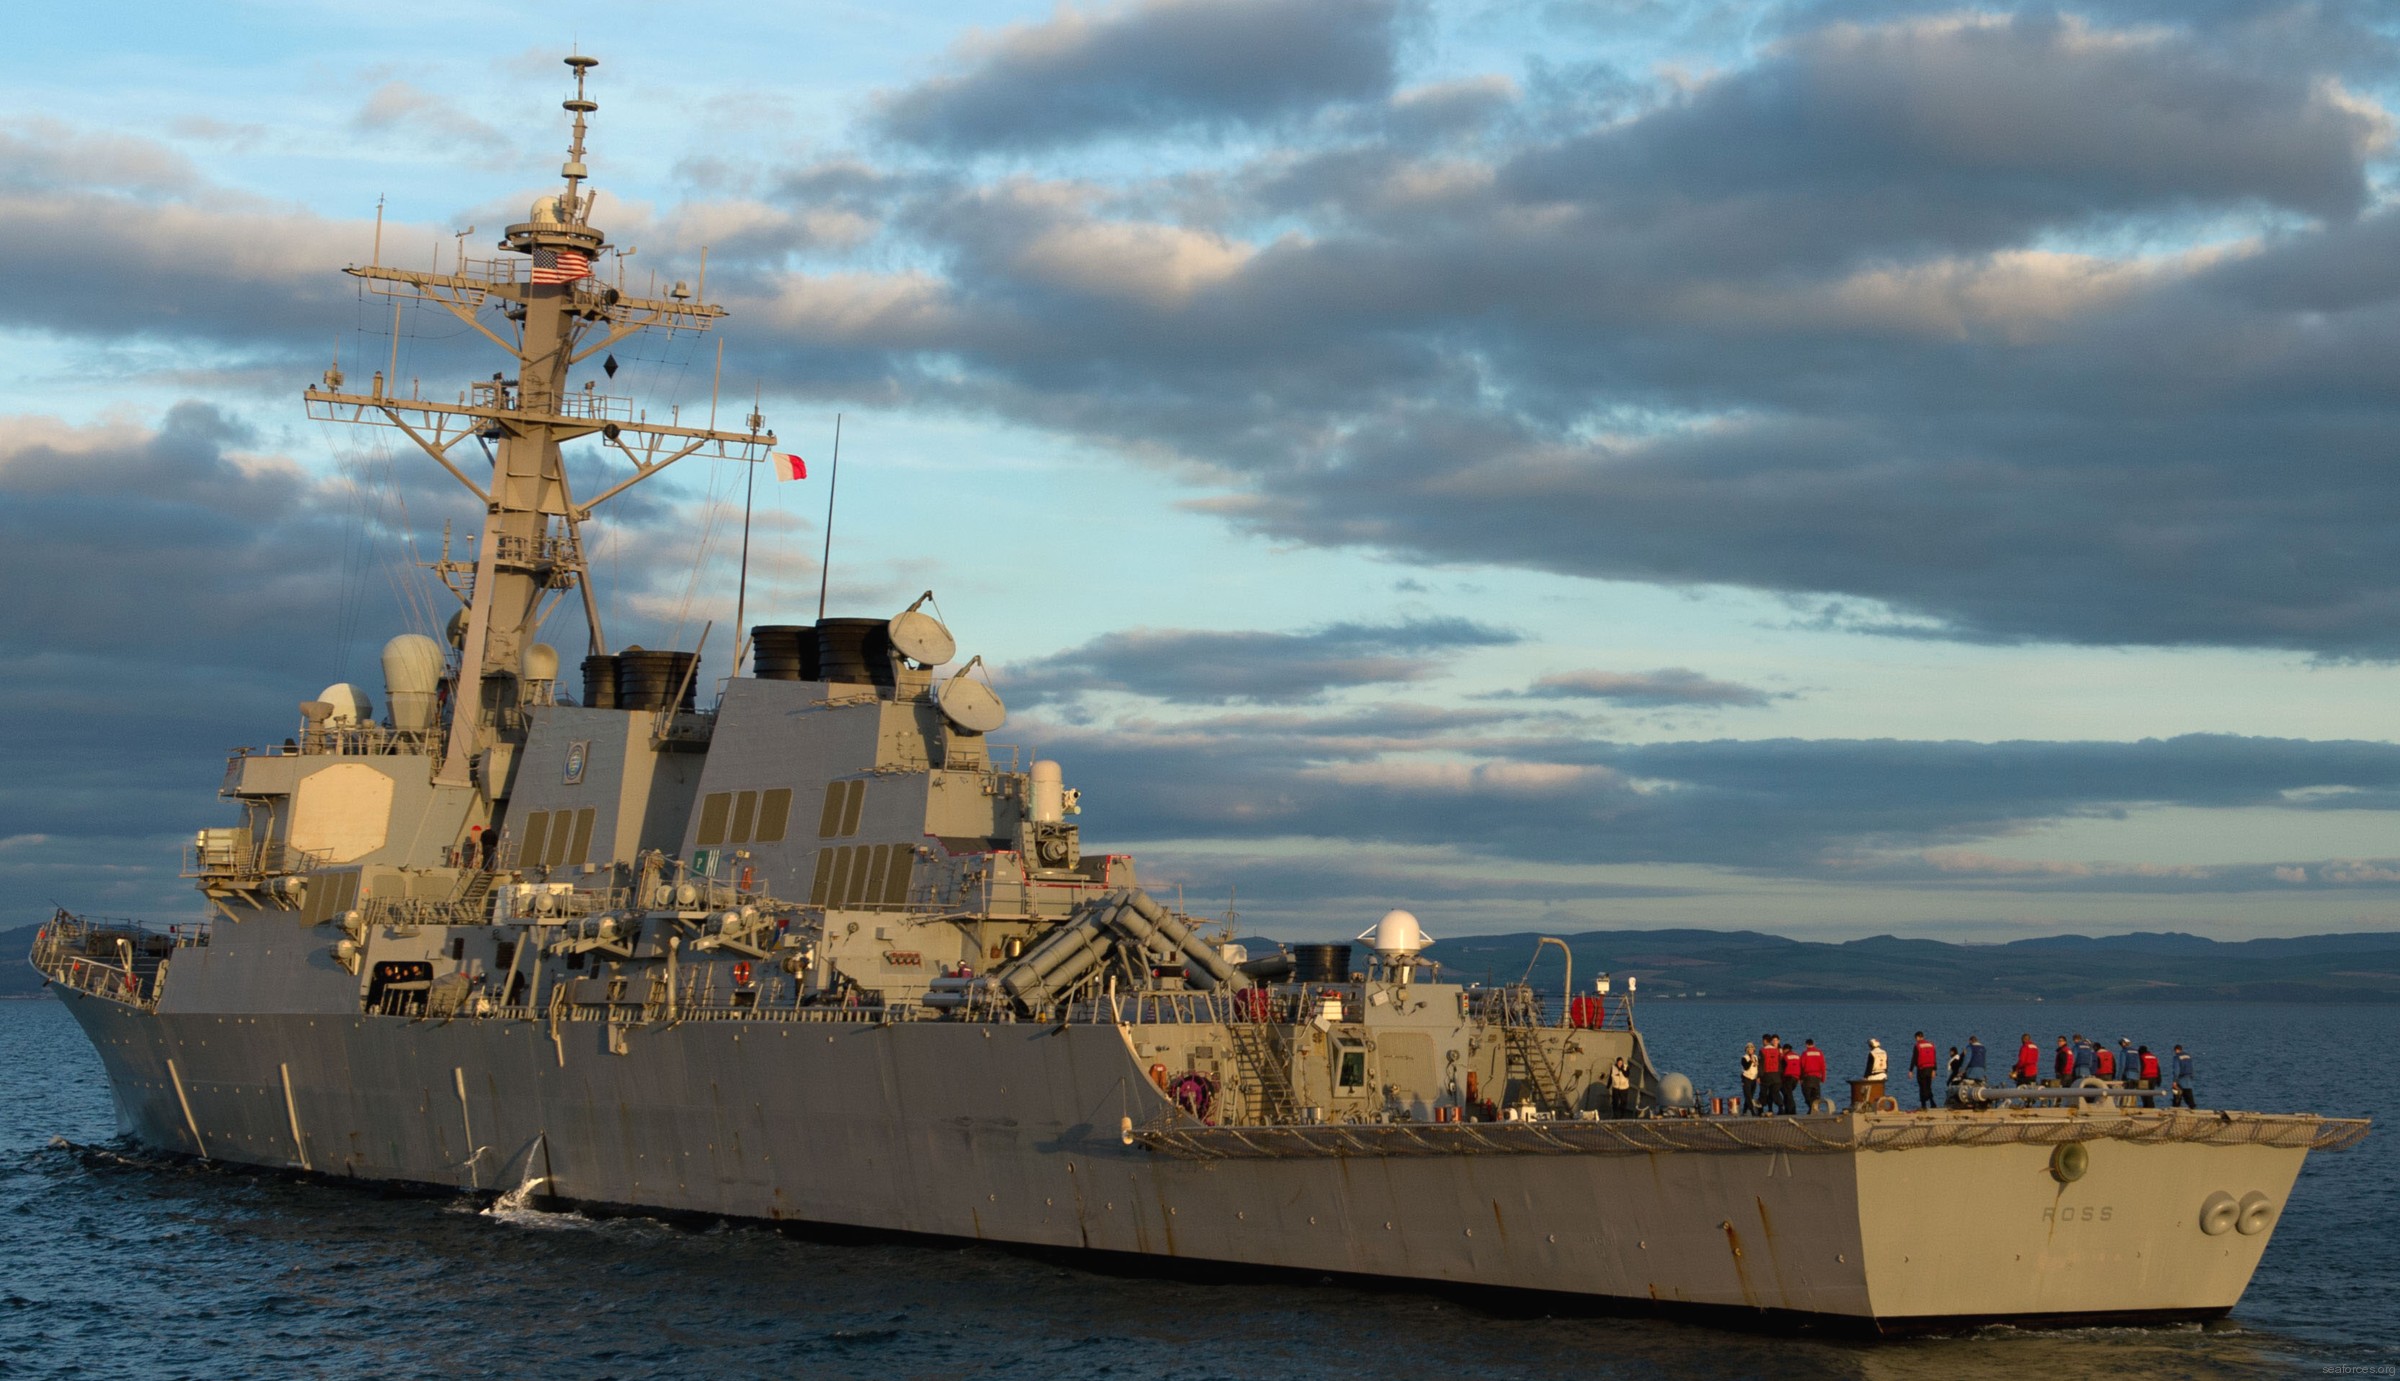 ddg-71 uss ross guided missile destroyer arleigh burke class aegis bmd 49